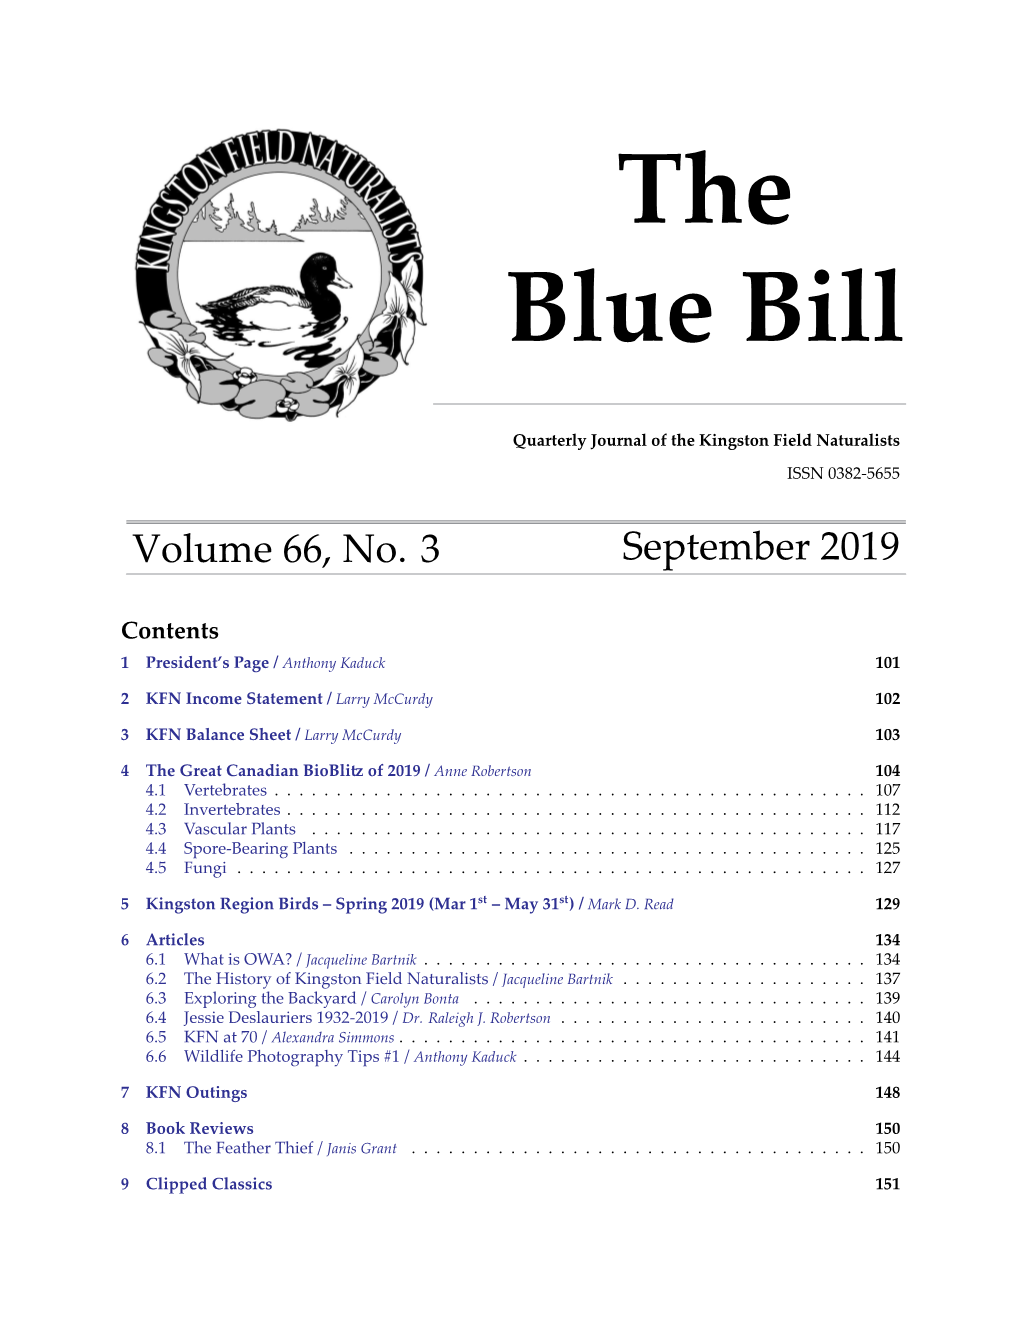 The Blue Bill Volume 66 Number 3